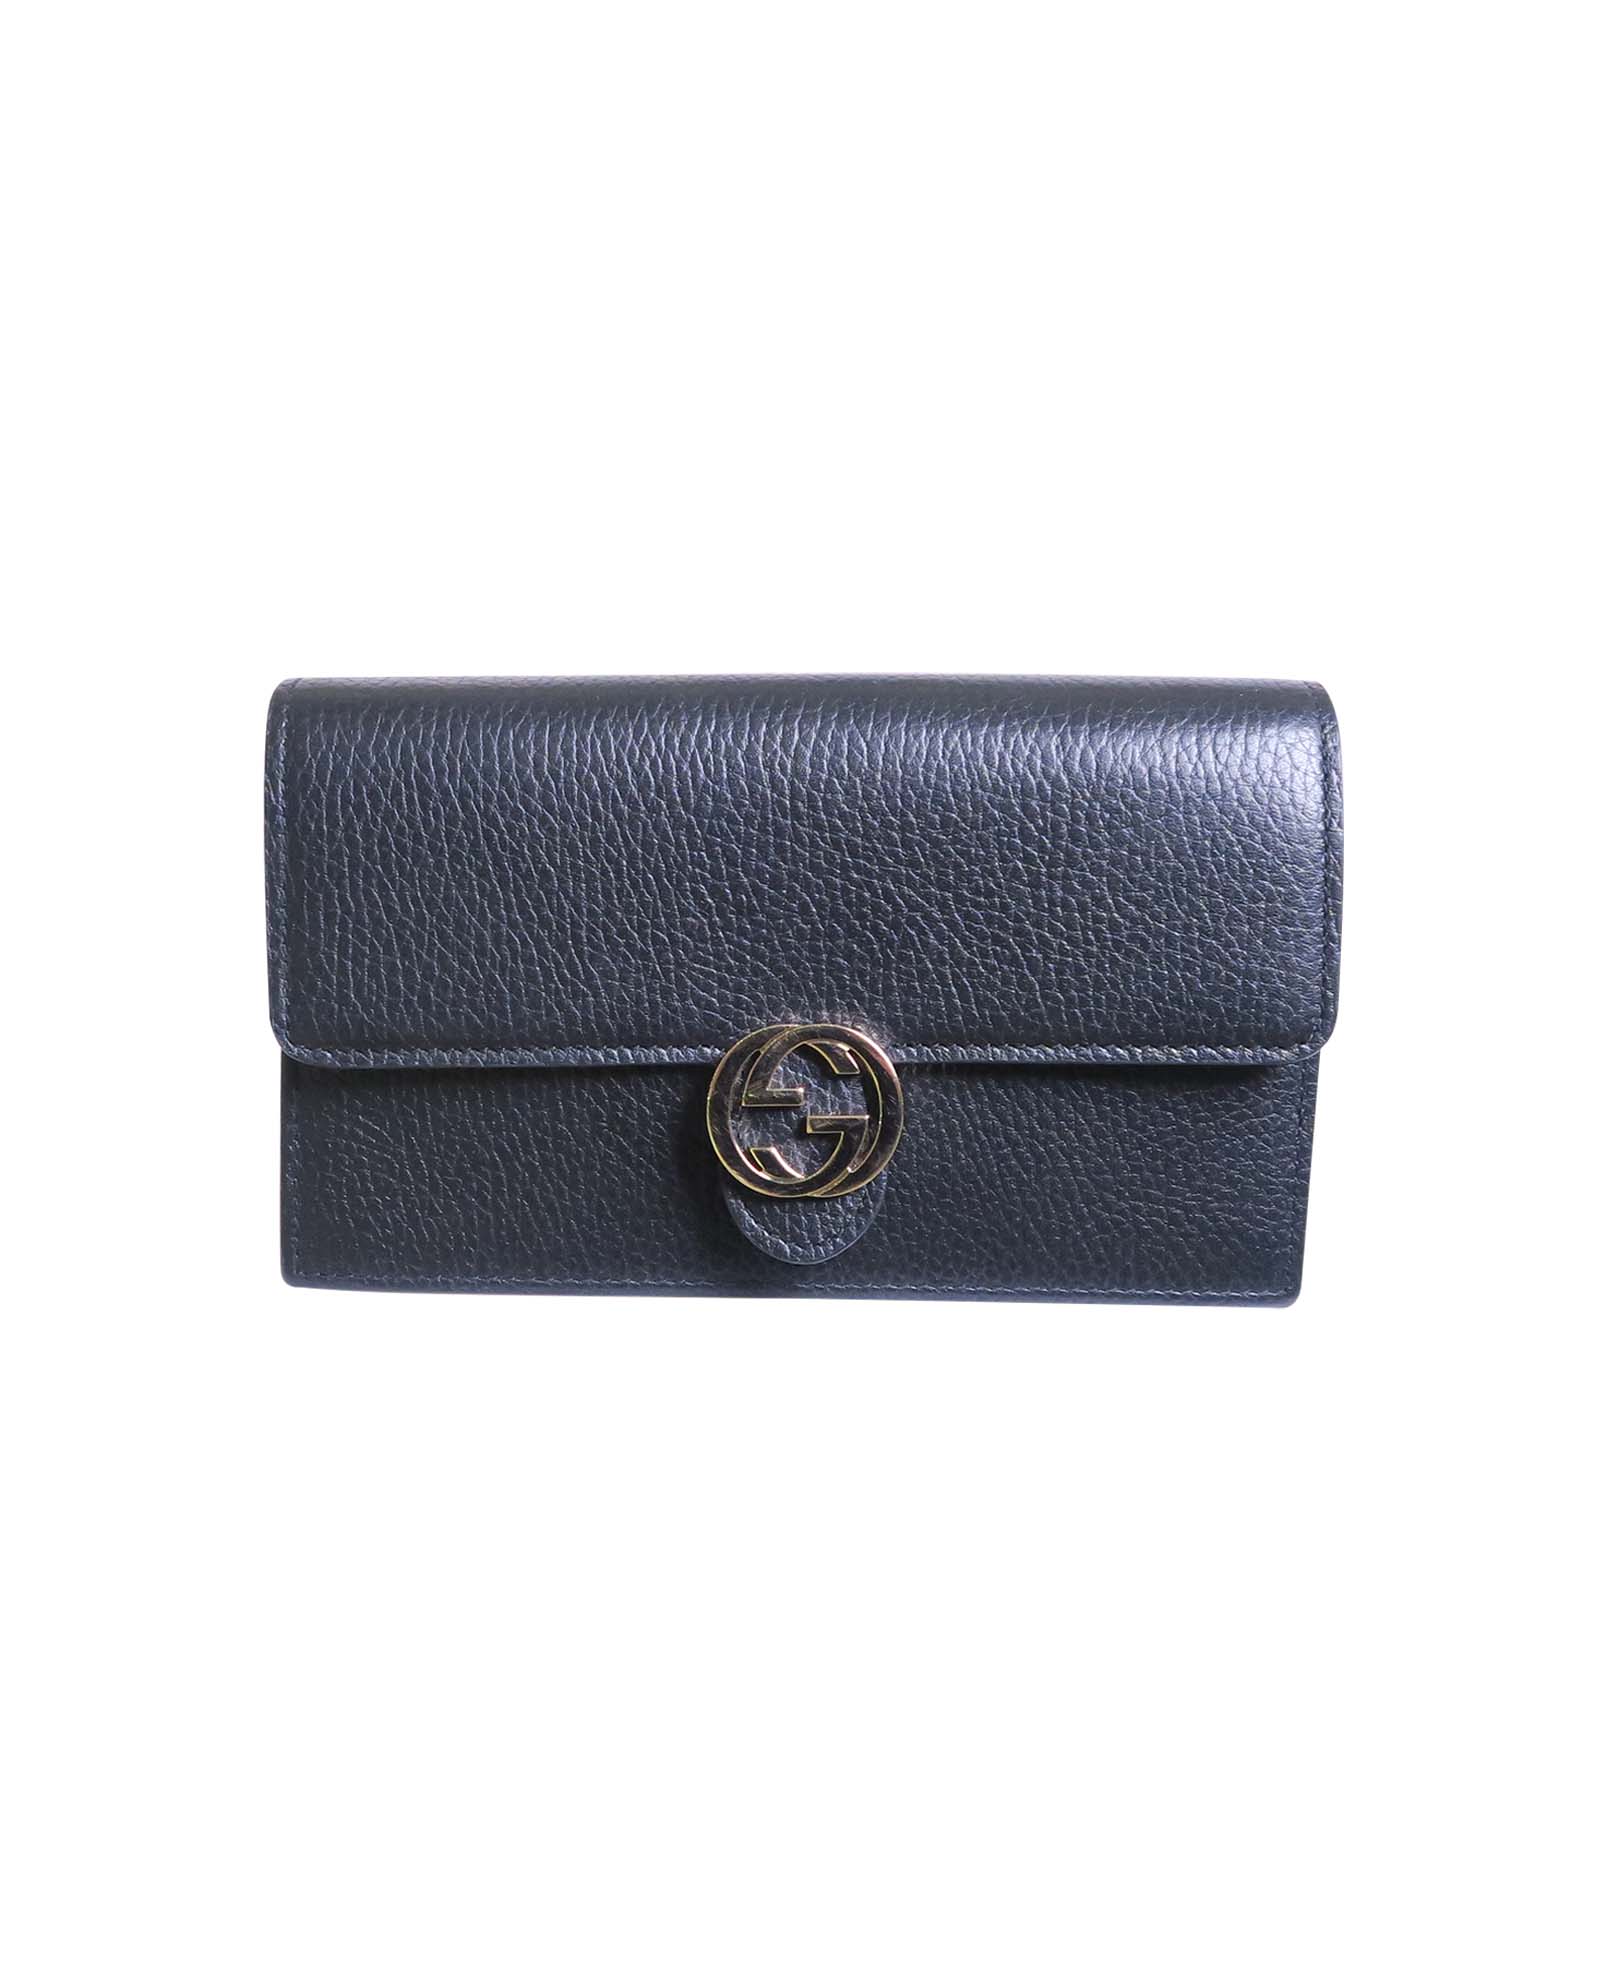 Gucci Wallet On Chain, Small Leather Goods Exchange | Sell Exchange